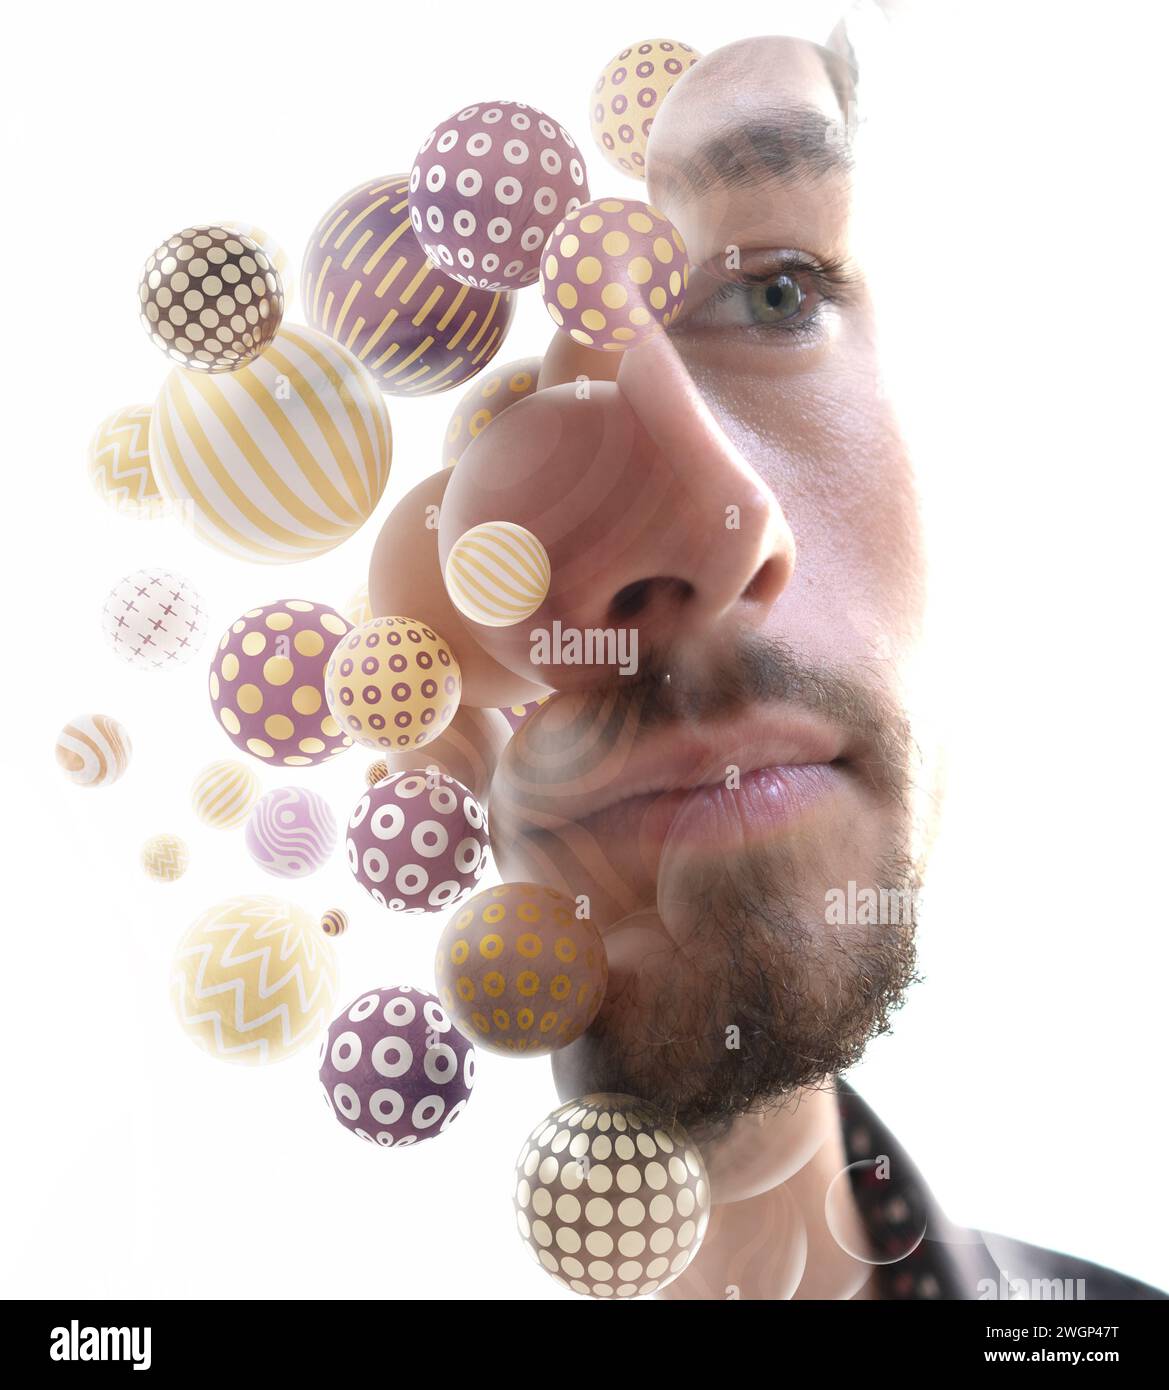 A double exposure close-up portrait of a young man combined with 3D spheres. Stock Photo